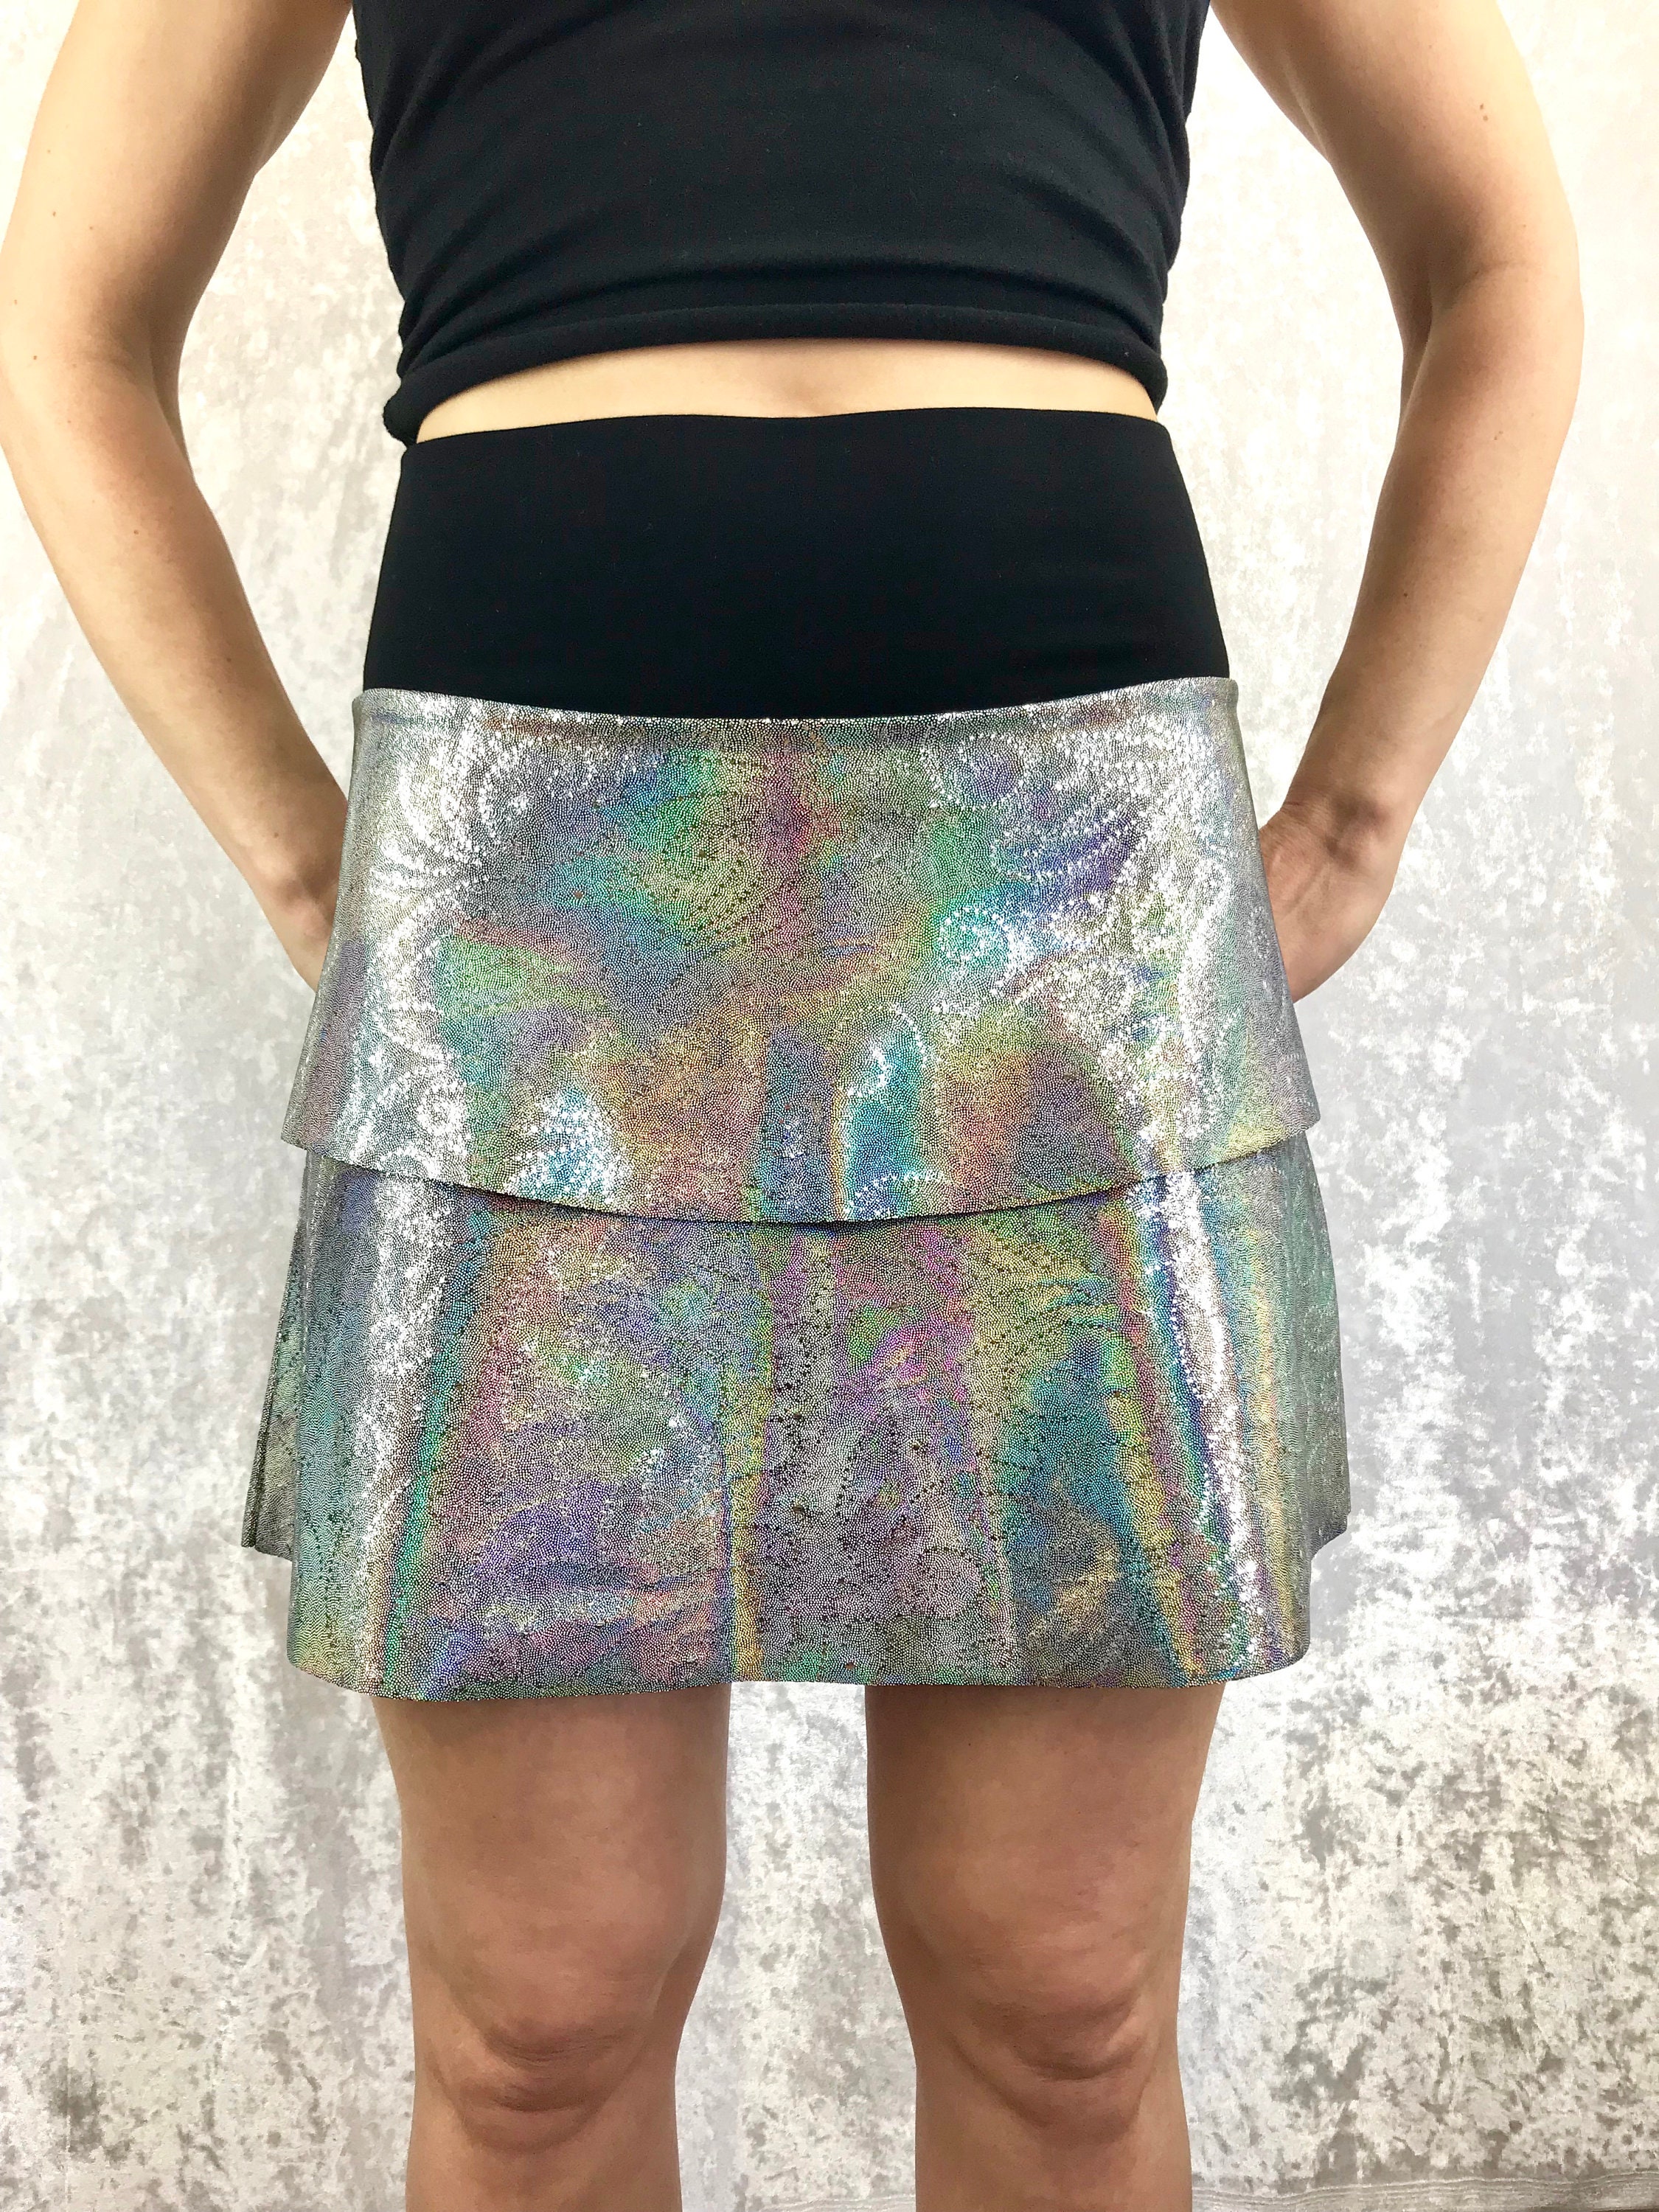 Hologram Floral Sparkle skirt with Bamboo waistband by So-Fine